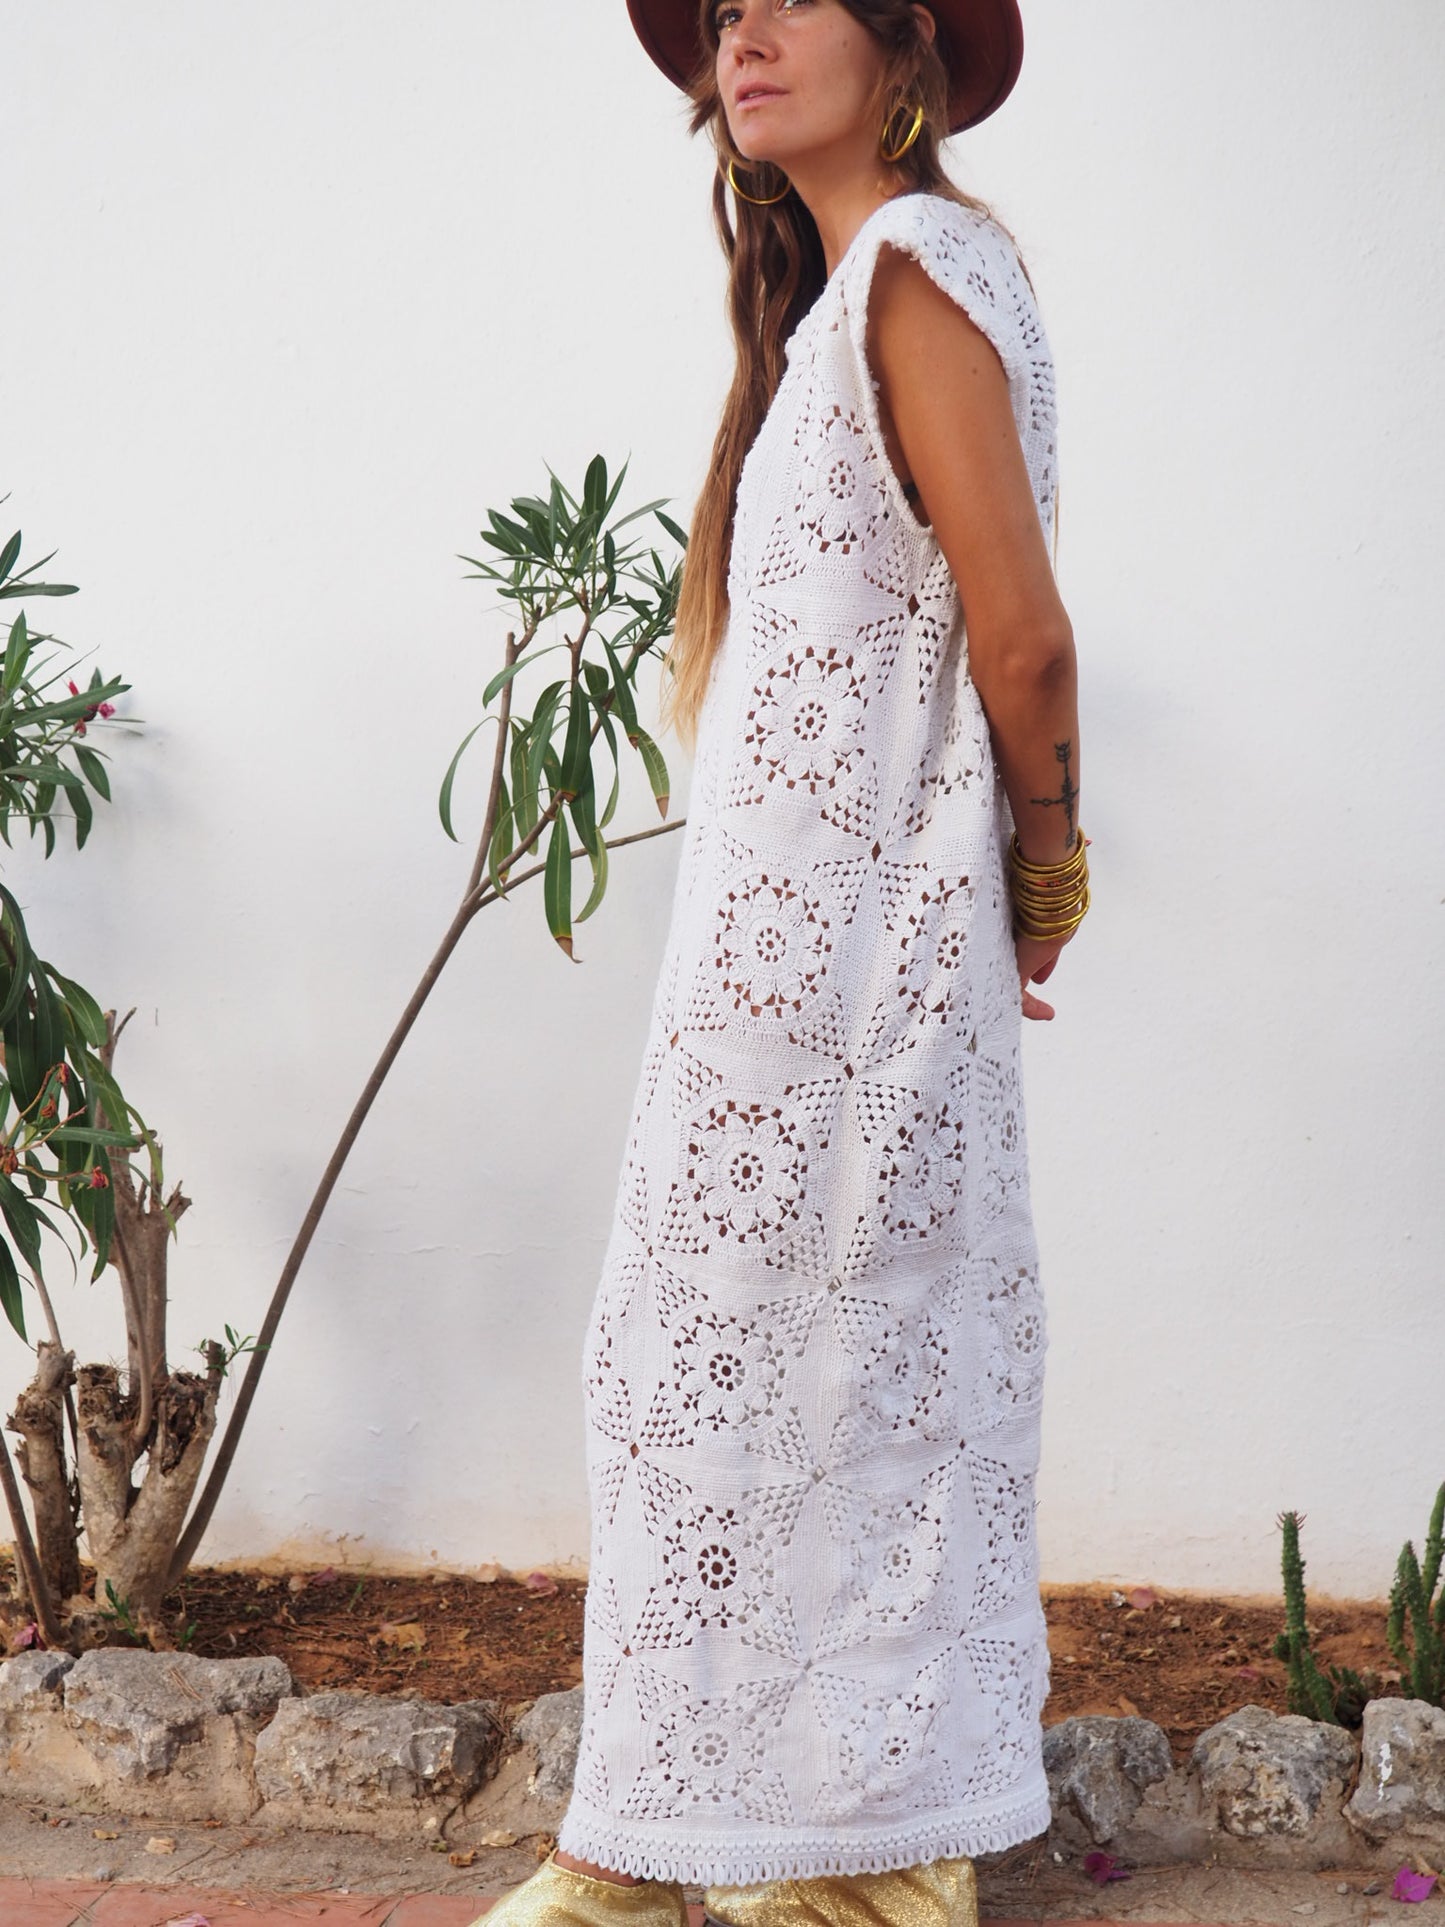 Super cute up-cycled long white crochet dress with lots of detailed hand work